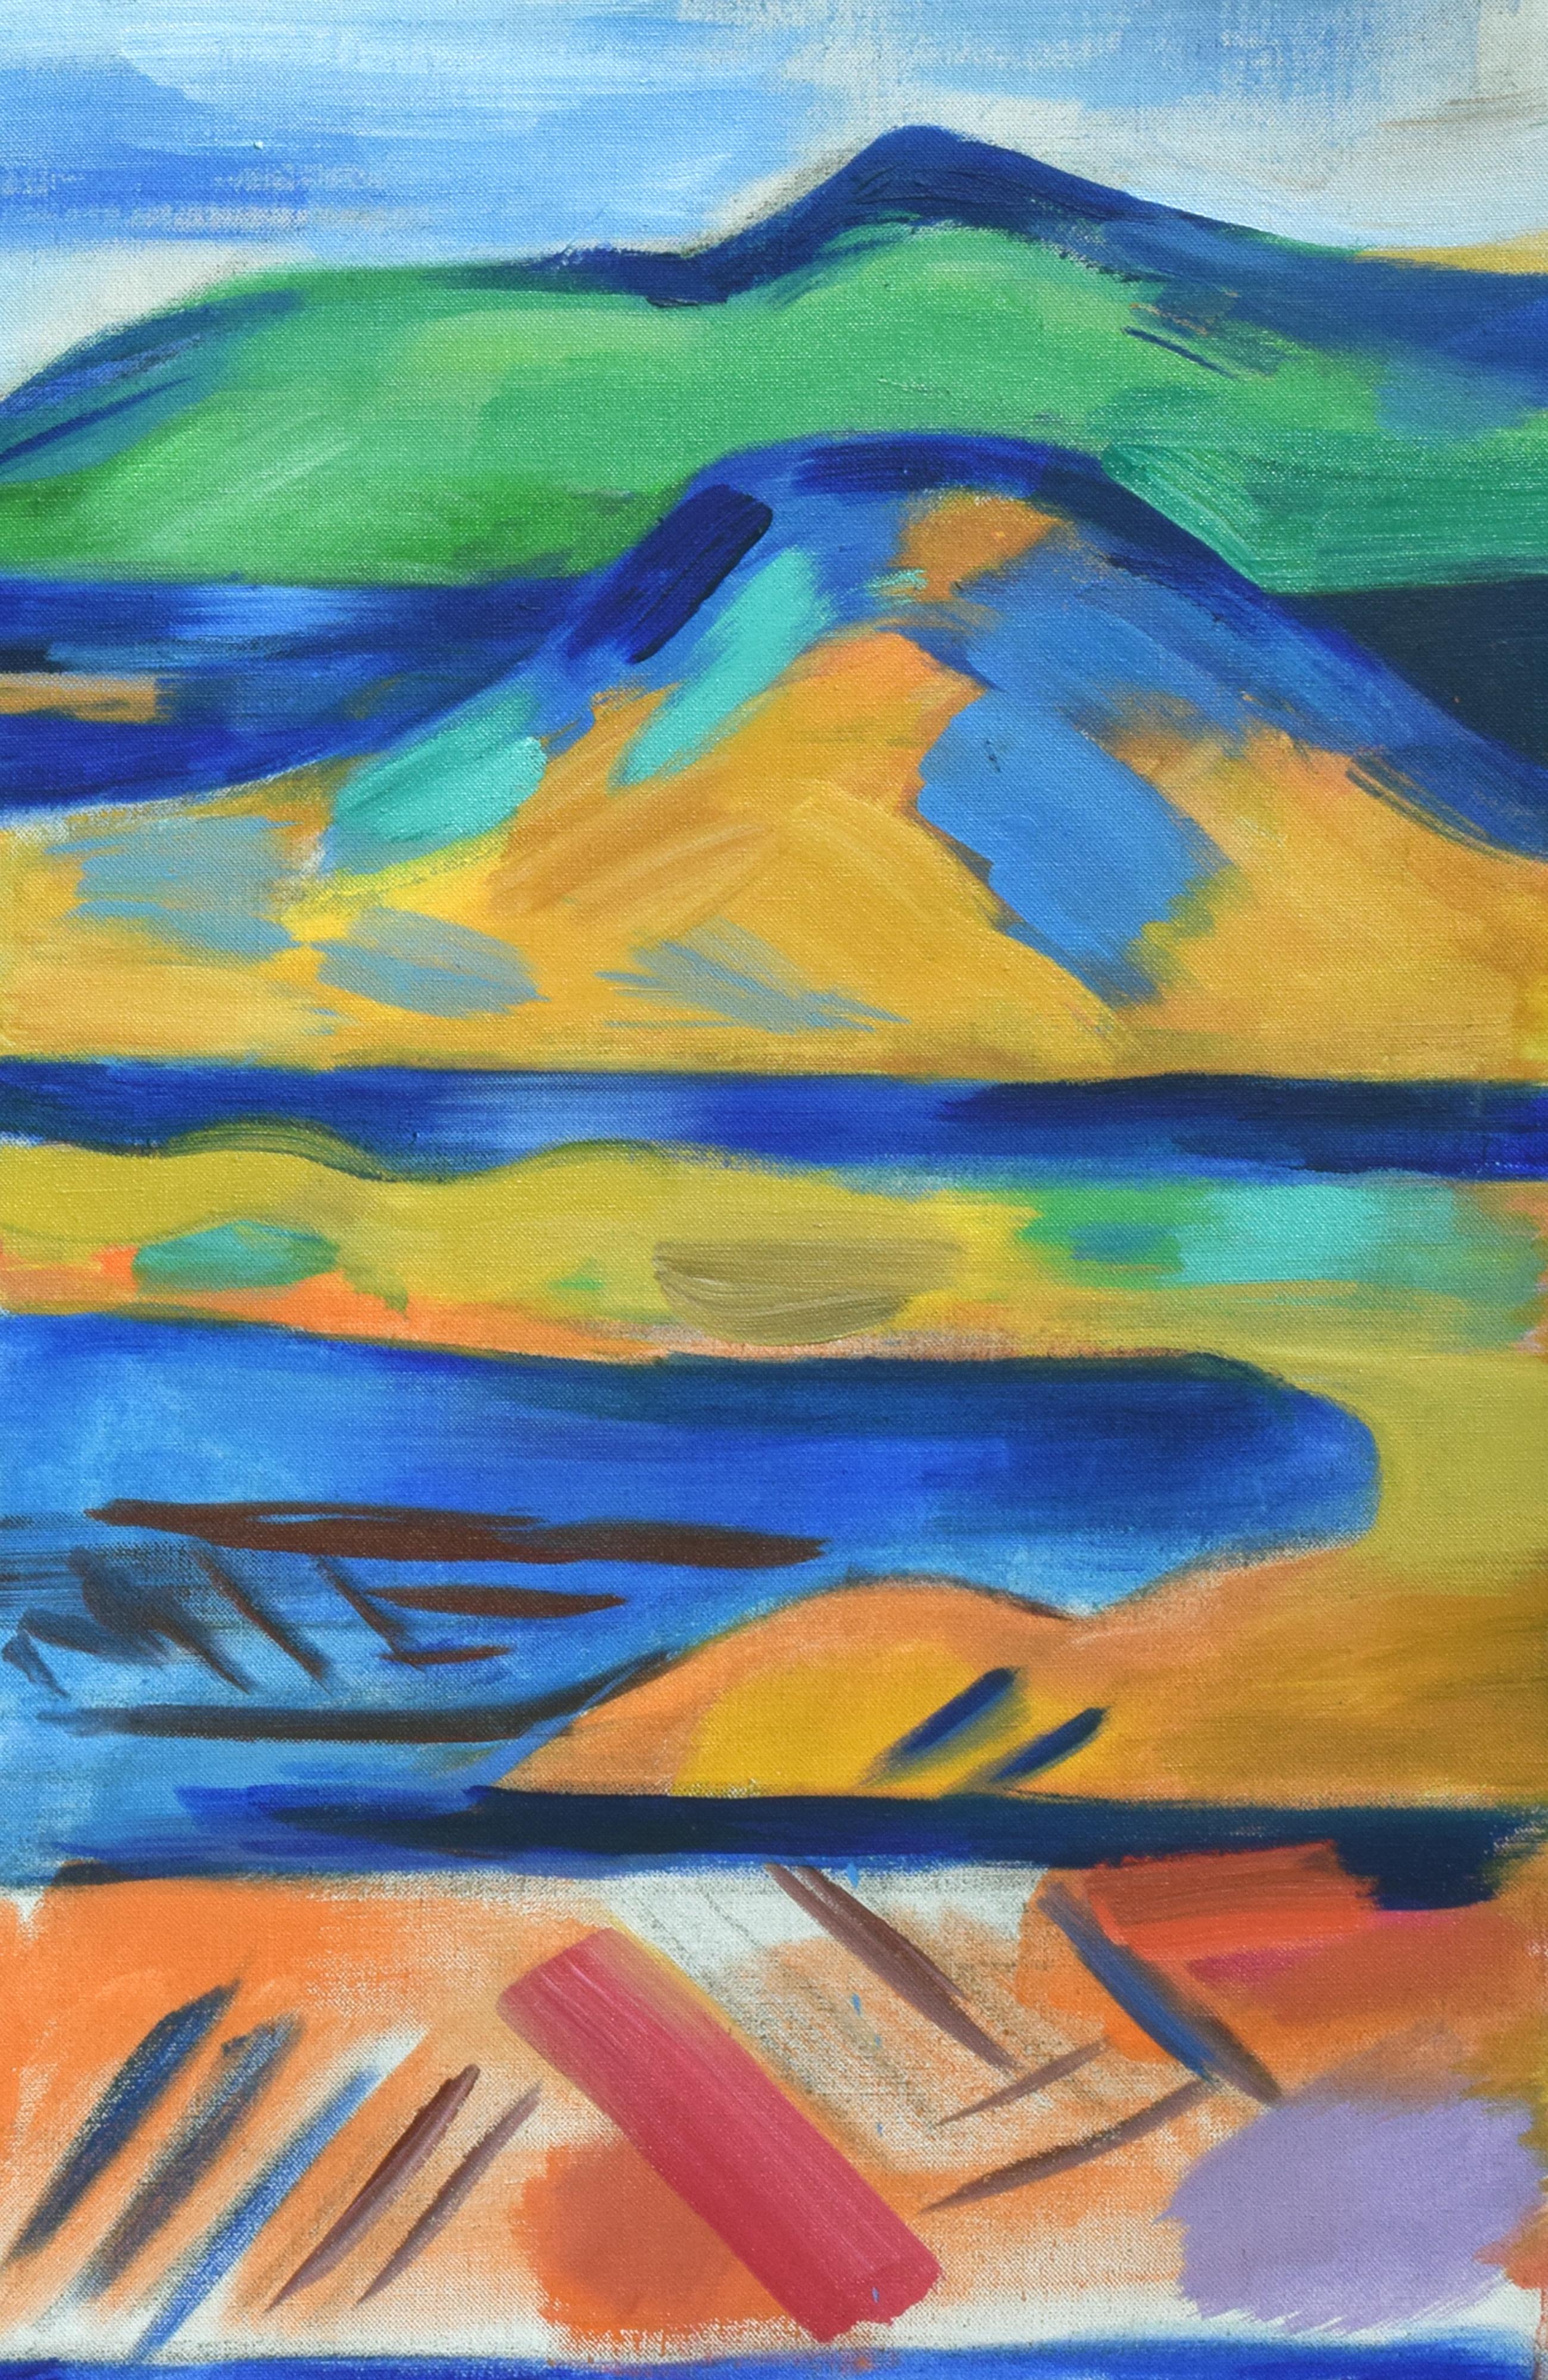 Oakland to Tamalpais Views - Fauvist Abstracted Landscape - Abstract Expressionist Painting by Erle Loran